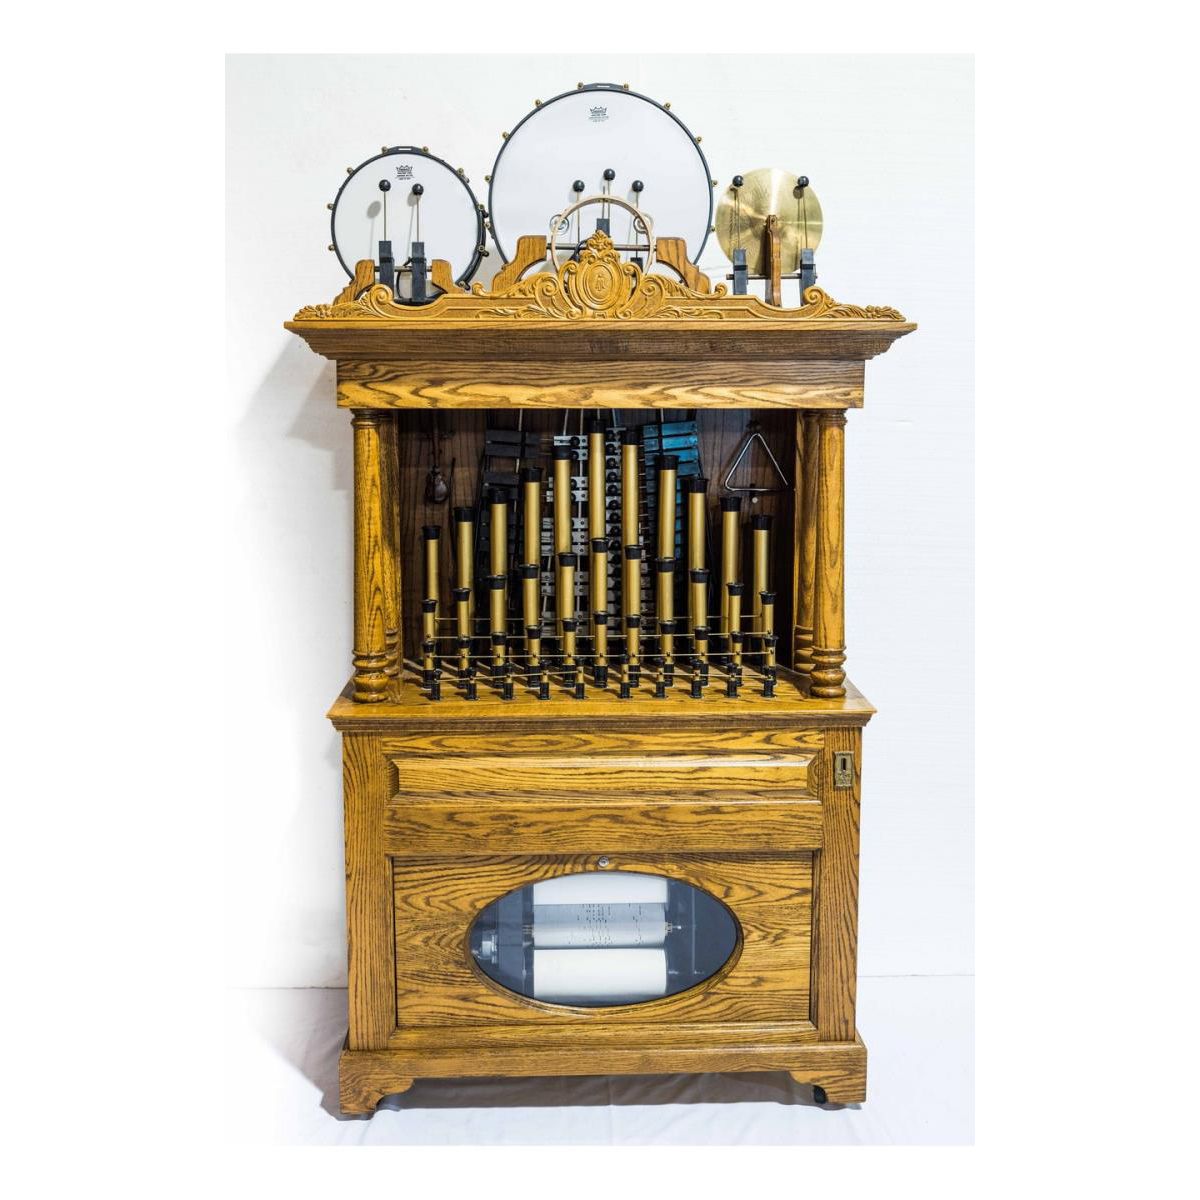 Coin Operated Band Organ/Orchestrion Quarter operated band organ/ orchestrion. I&hellip;